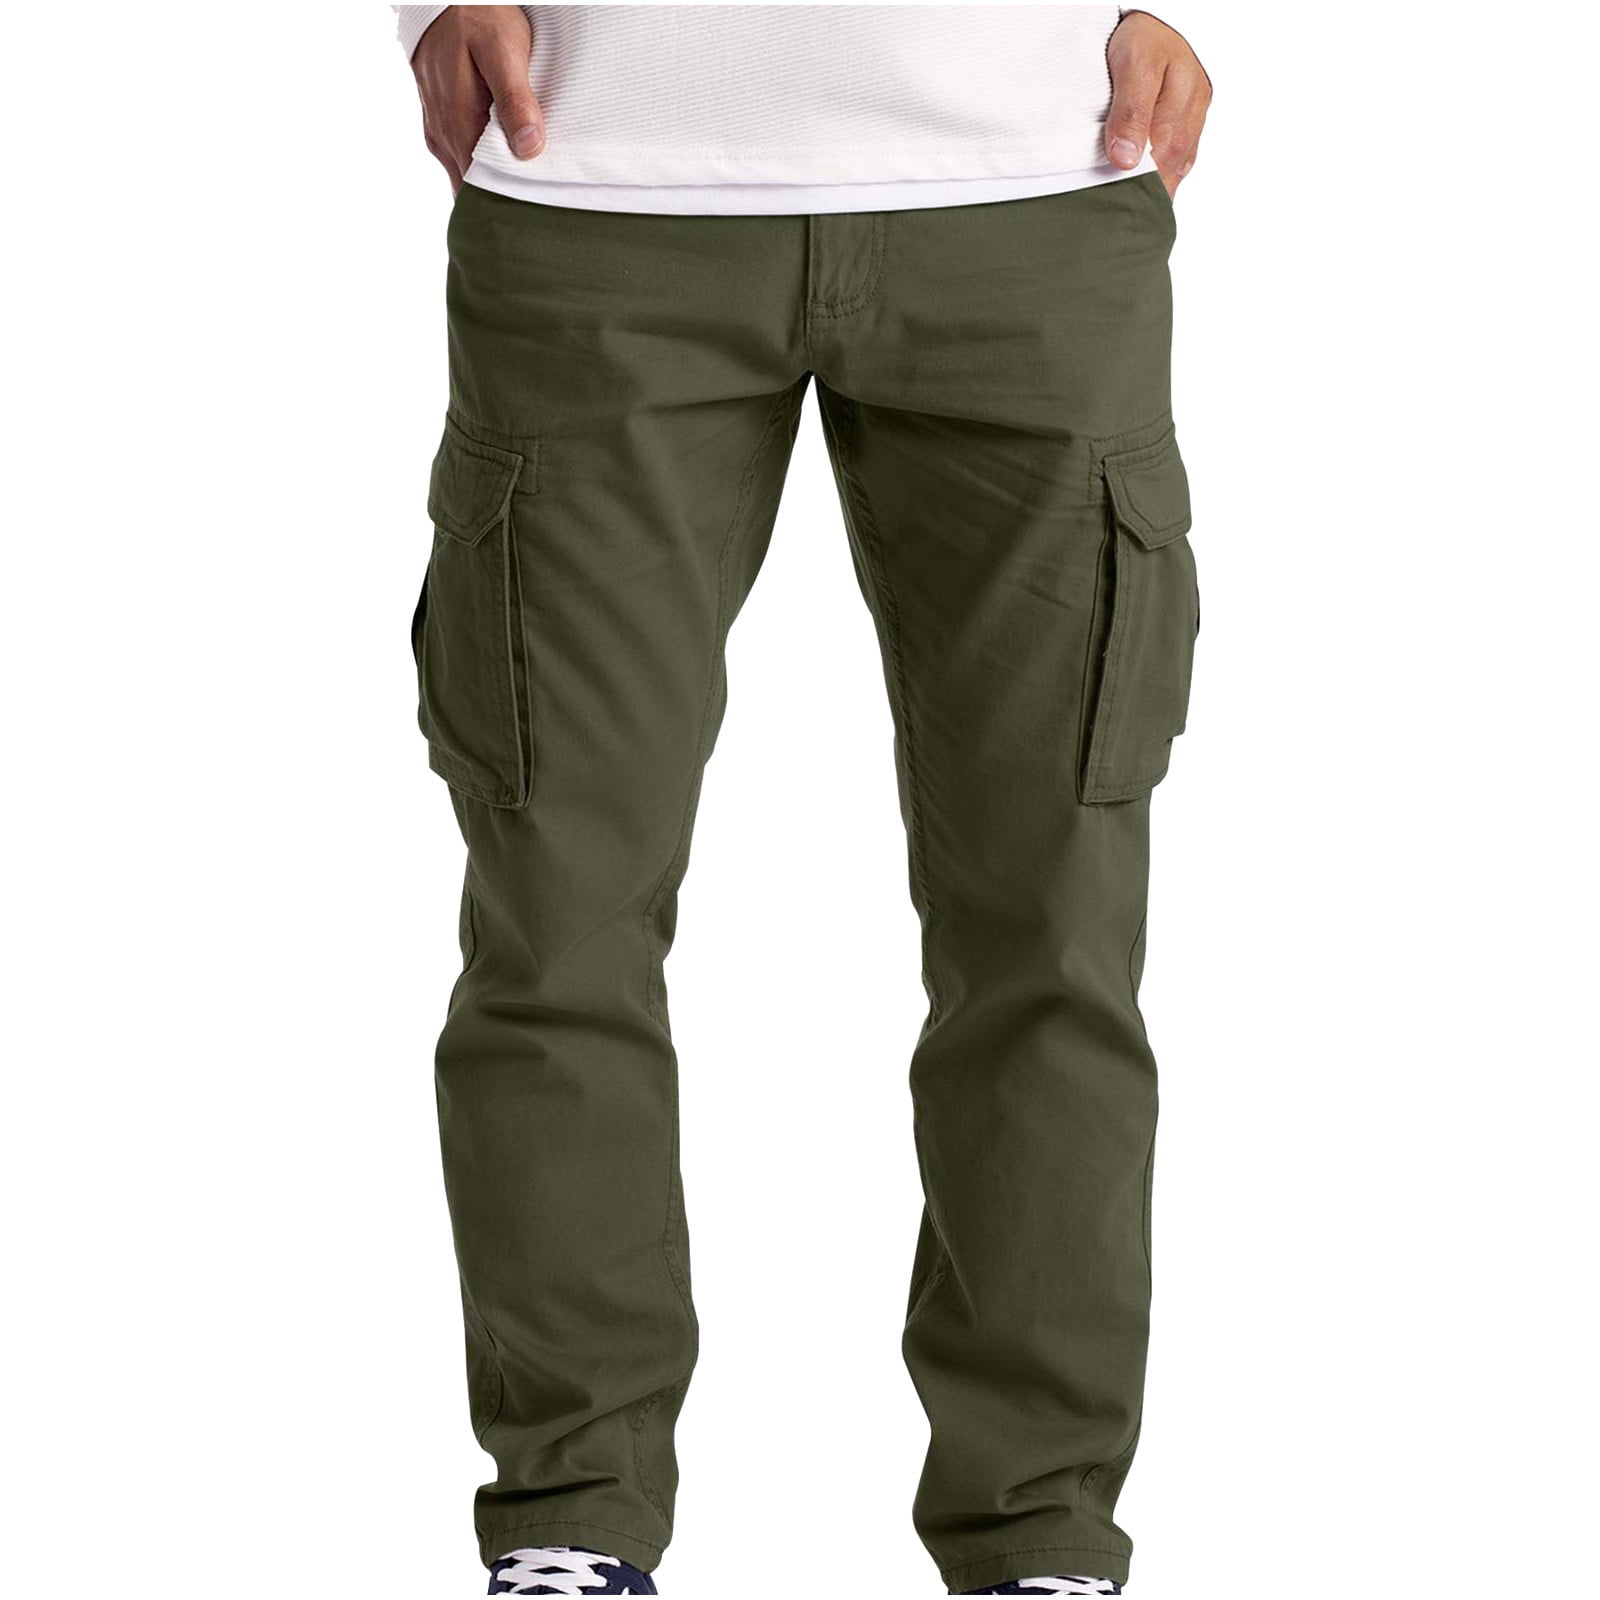 ZKCCNUK Cargo Pants for Men's Cargo Trousers Work Wear Combat Safety Cargo  6 Pocket Full Pants Navy L on Clearance 